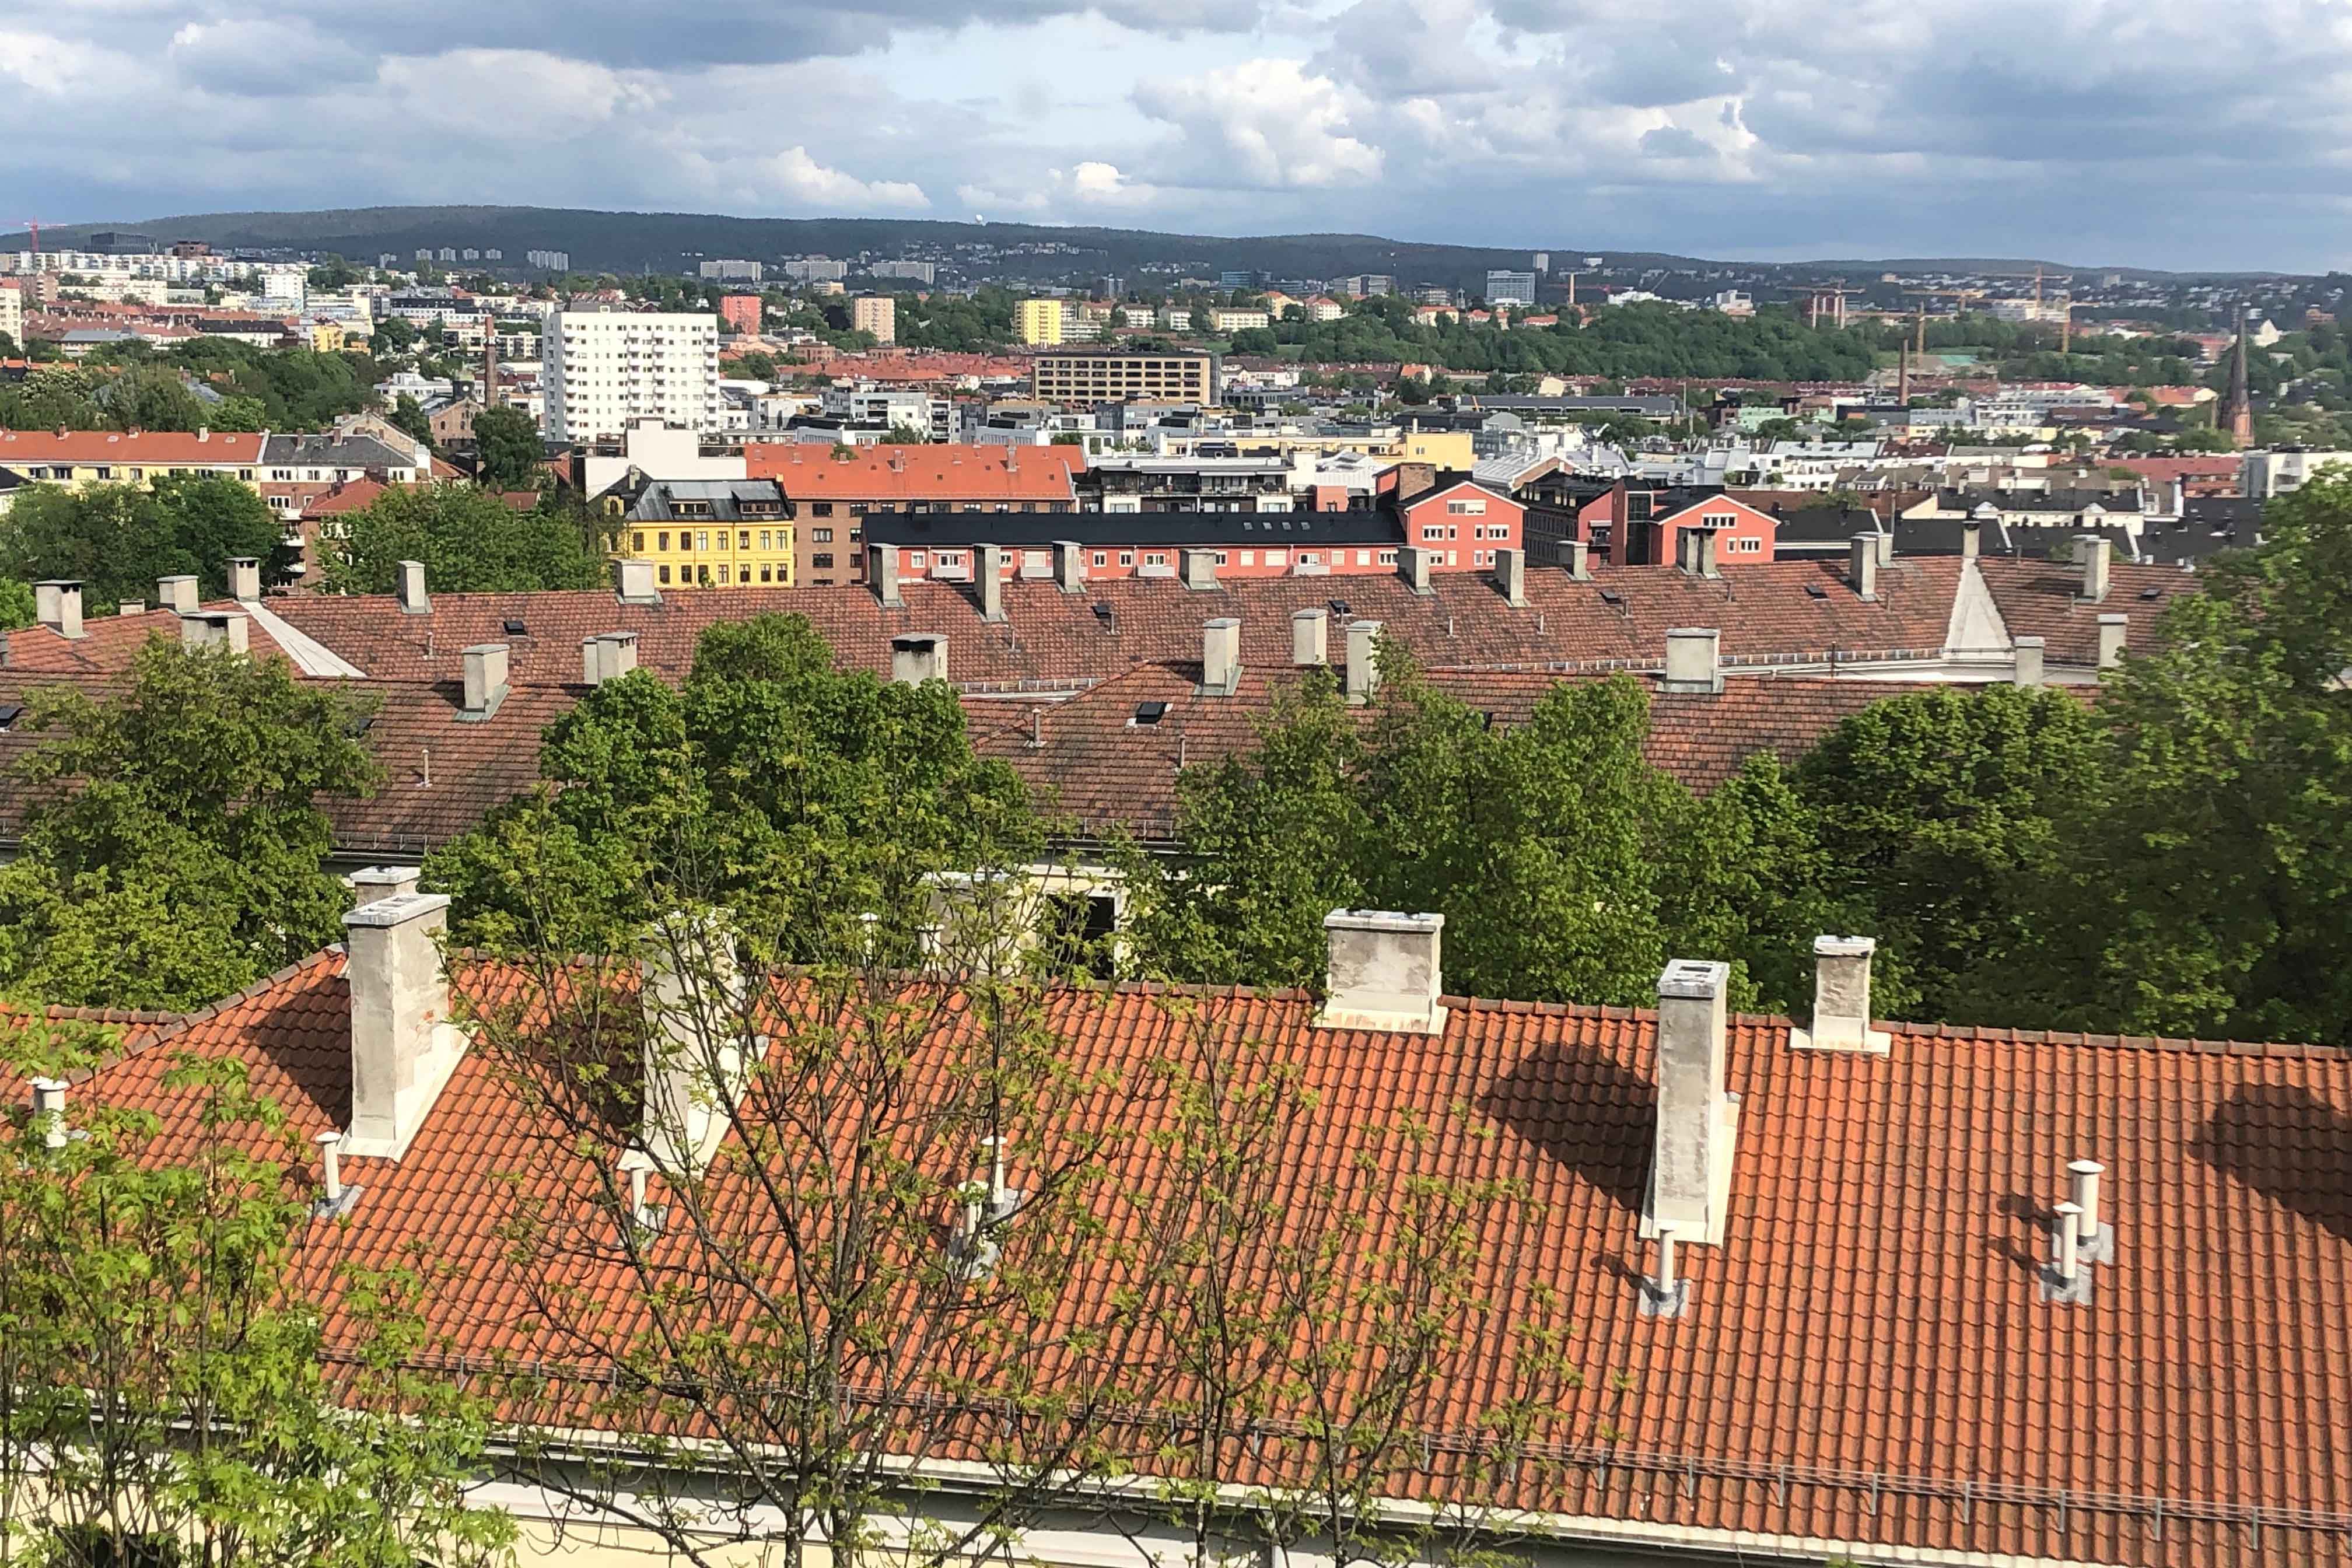 From a rooftop looking out to Oslo, Norway